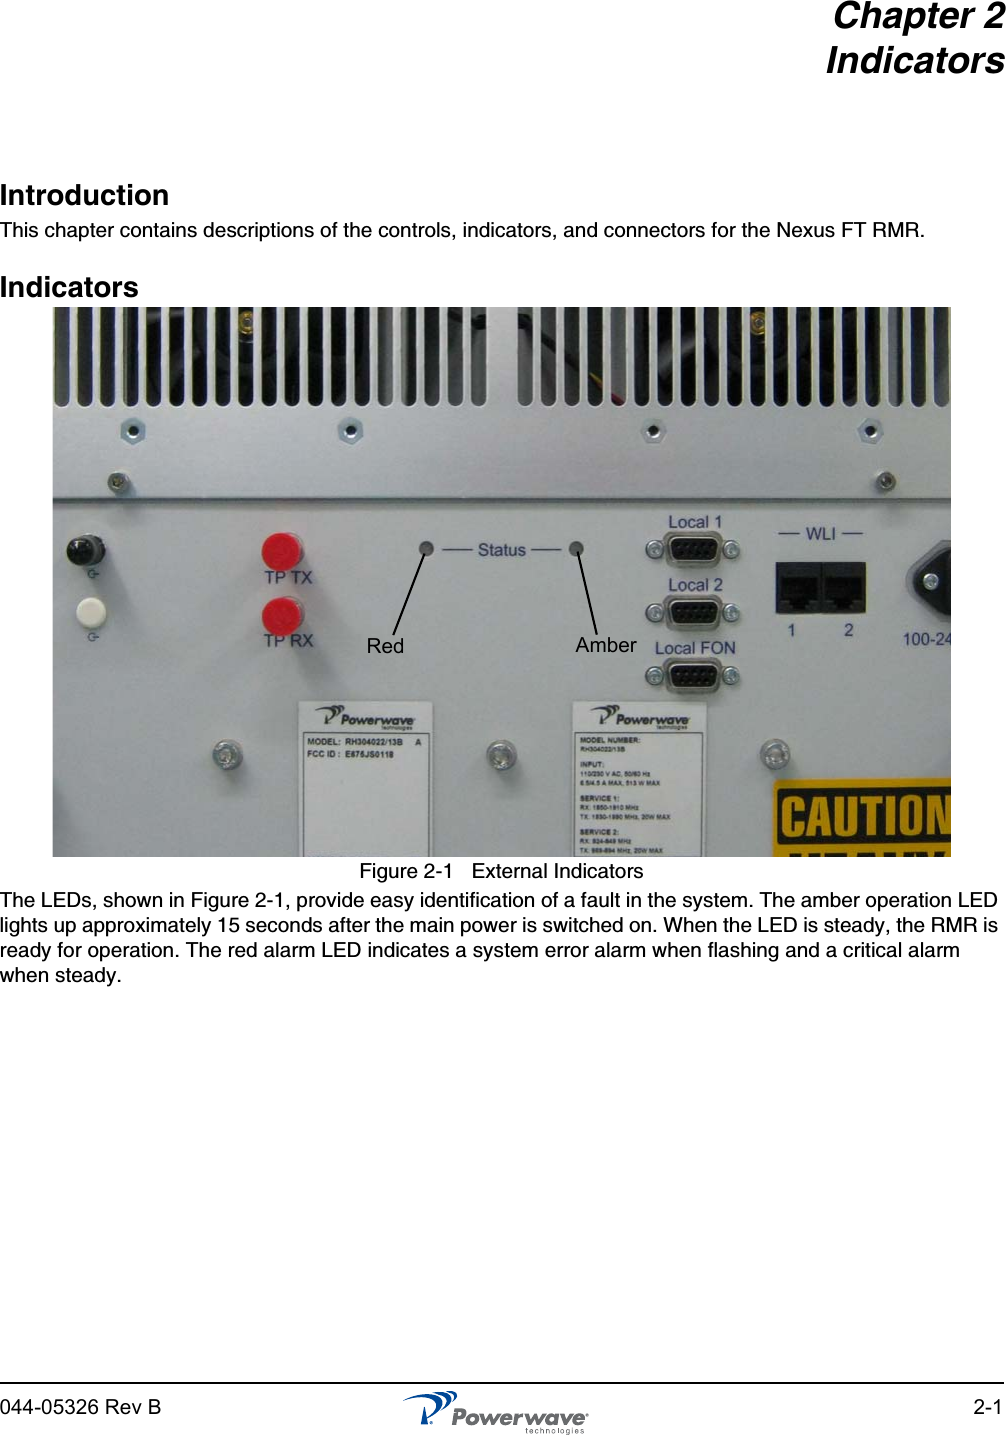 044-05326 Rev B 2-1Chapter 2IndicatorsIntroductionThis chapter contains descriptions of the controls, indicators, and connectors for the Nexus FT RMR. IndicatorsFigure 2-1   External IndicatorsThe LEDs, shown in Figure 2-1, provide easy identification of a fault in the system. The amber operation LED lights up approximately 15 seconds after the main power is switched on. When the LED is steady, the RMR is ready for operation. The red alarm LED indicates a system error alarm when flashing and a critical alarm when steady.Red Amber